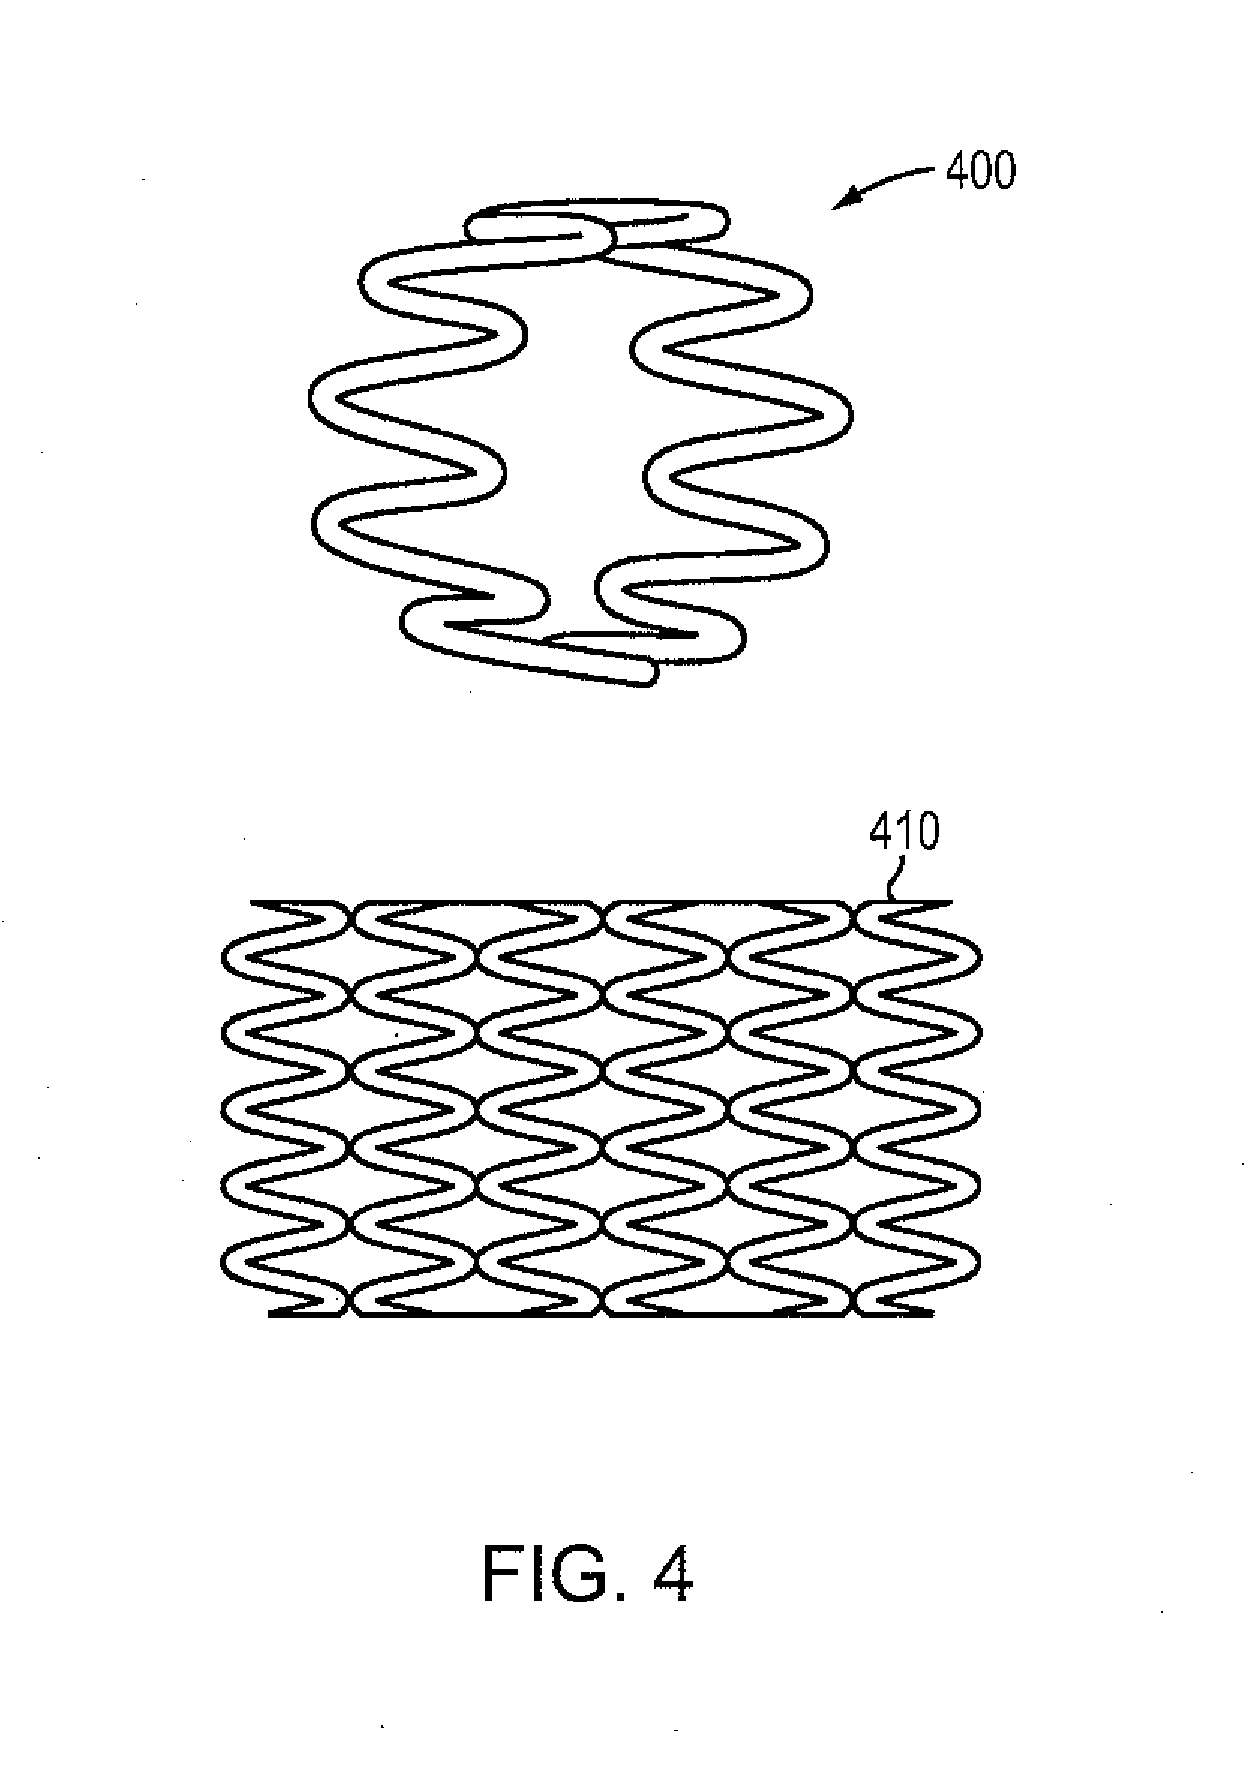 Magnesium-Based Absorbable Implants